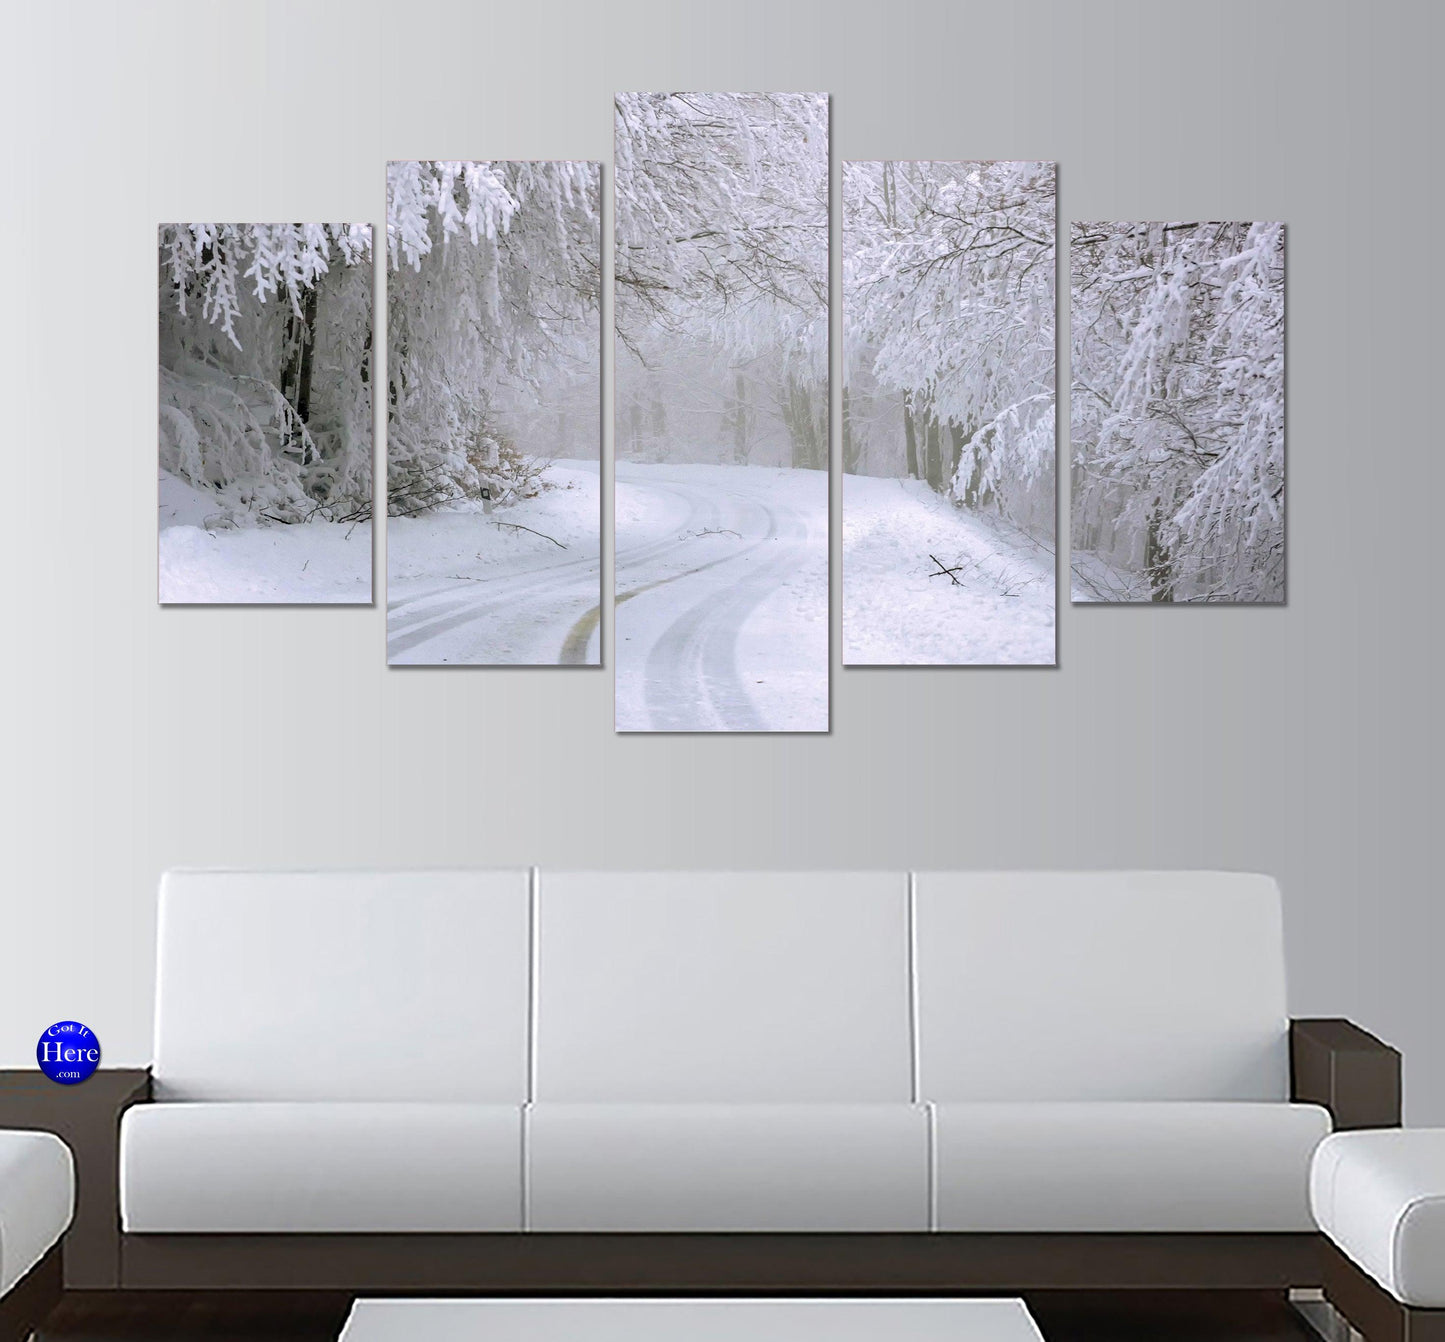 Icy Winter Road Through The Snowy Forest 5 Panel Canvas Print Wall Art - GotItHere.com